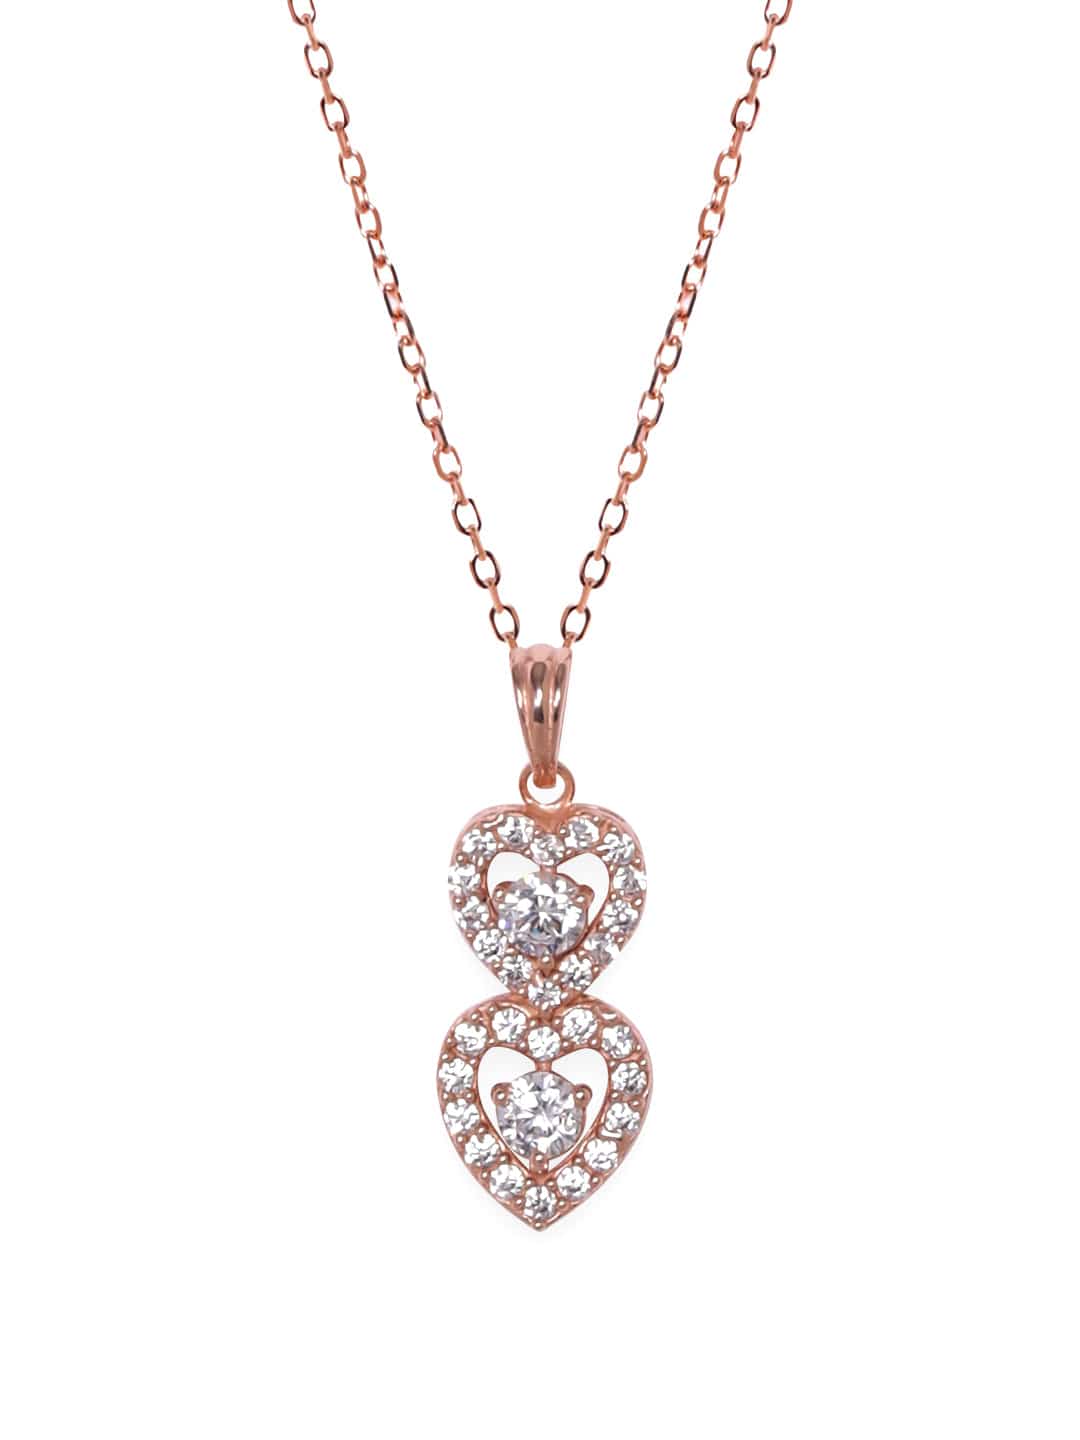 Rubans 25 Silver 18K Rose Gold Plated Double Layer Heart Pendant Necklace Necklaces, Necklace Sets, Chains &amp; Mangalsutra